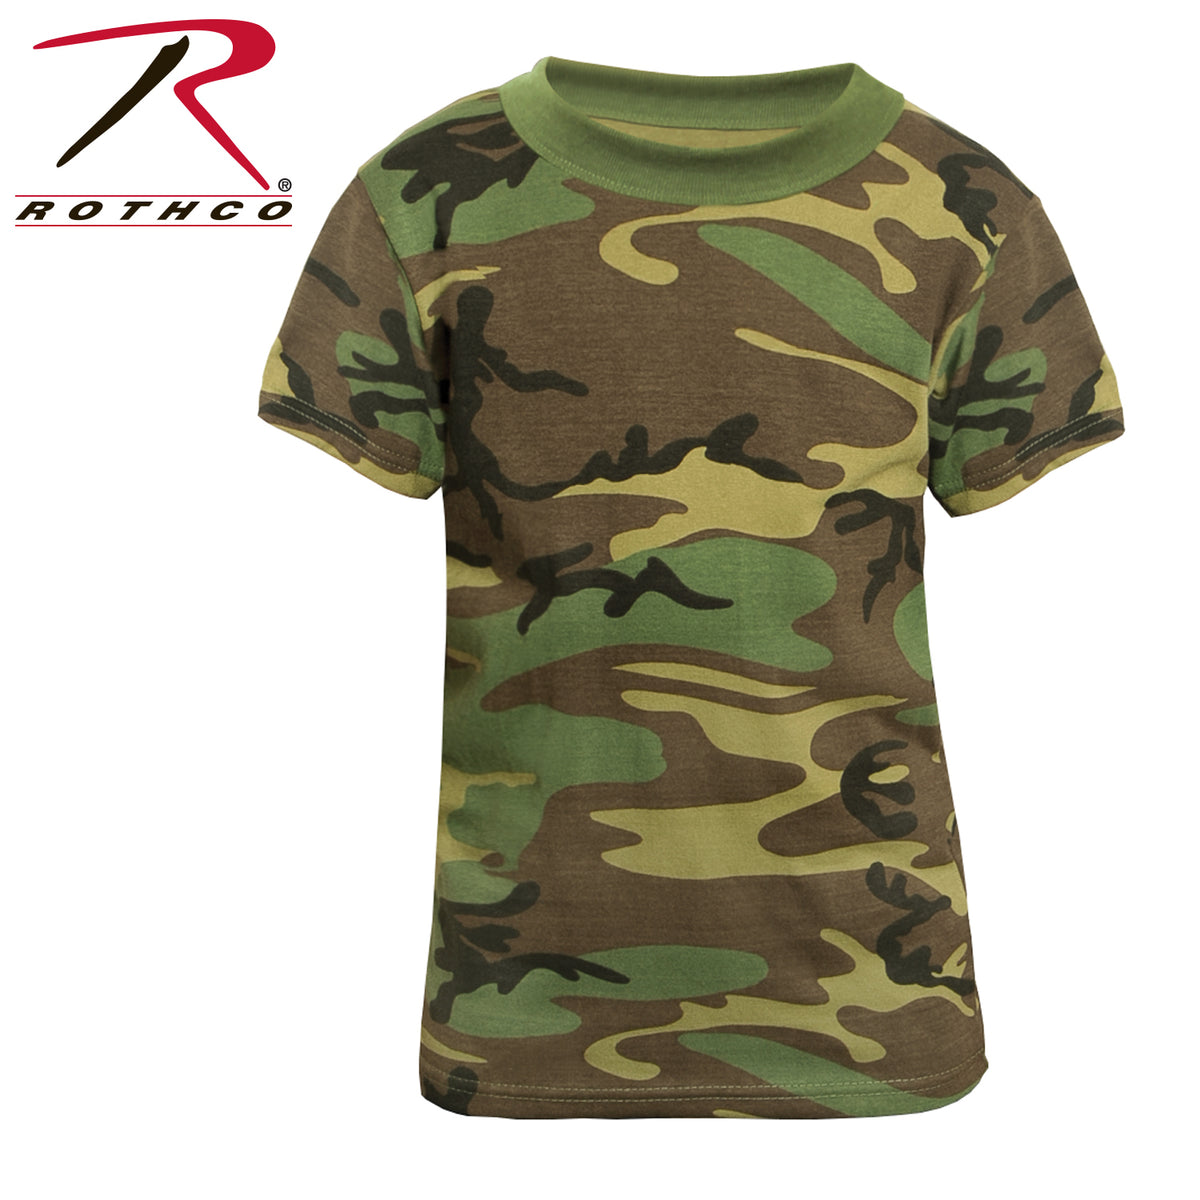 Rothco Kid's Camouflage Soldier Costume